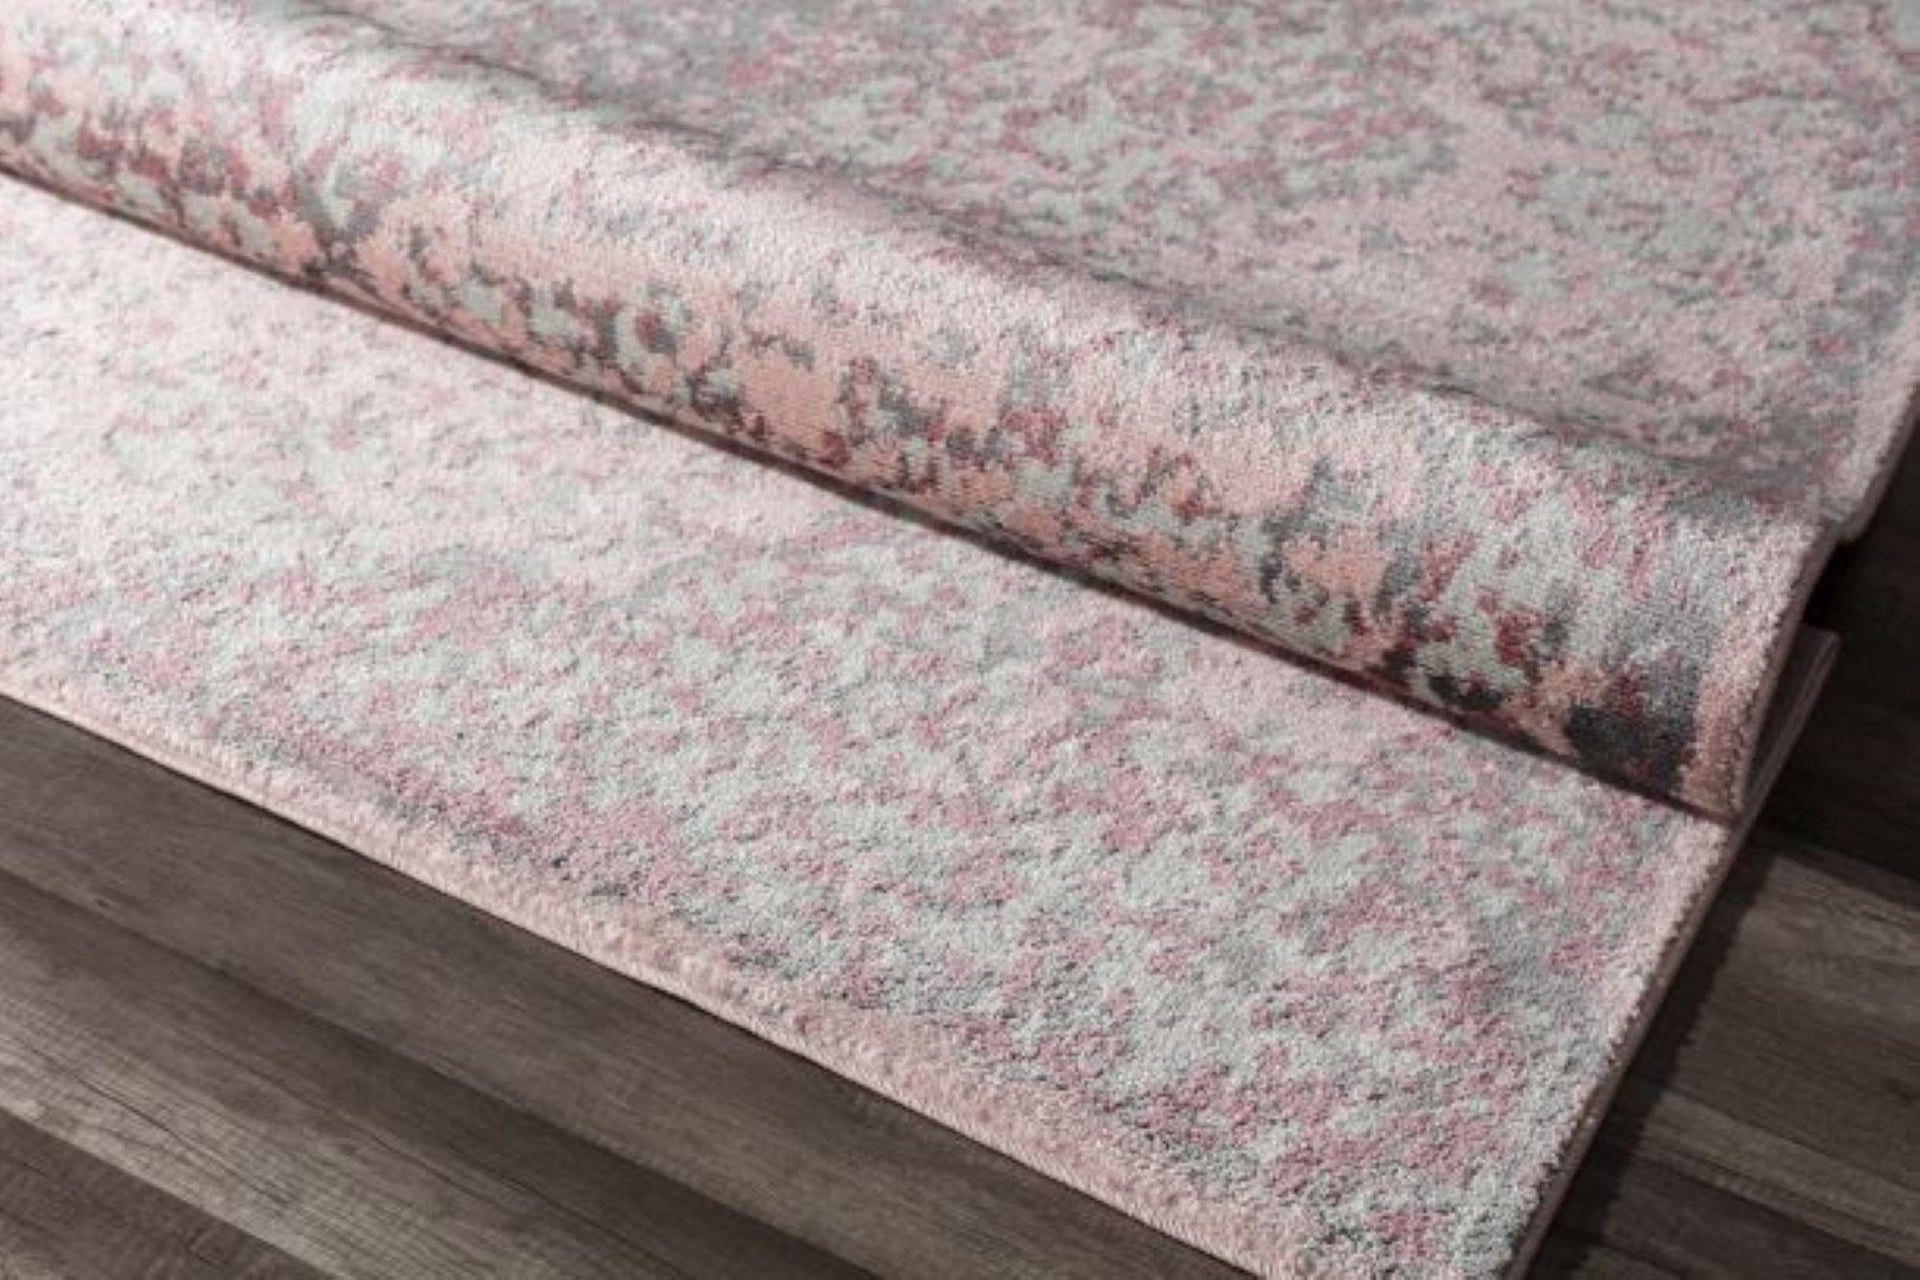 Little Seeds Serenity Saturated Rug Blush 8 X 10 - Blush